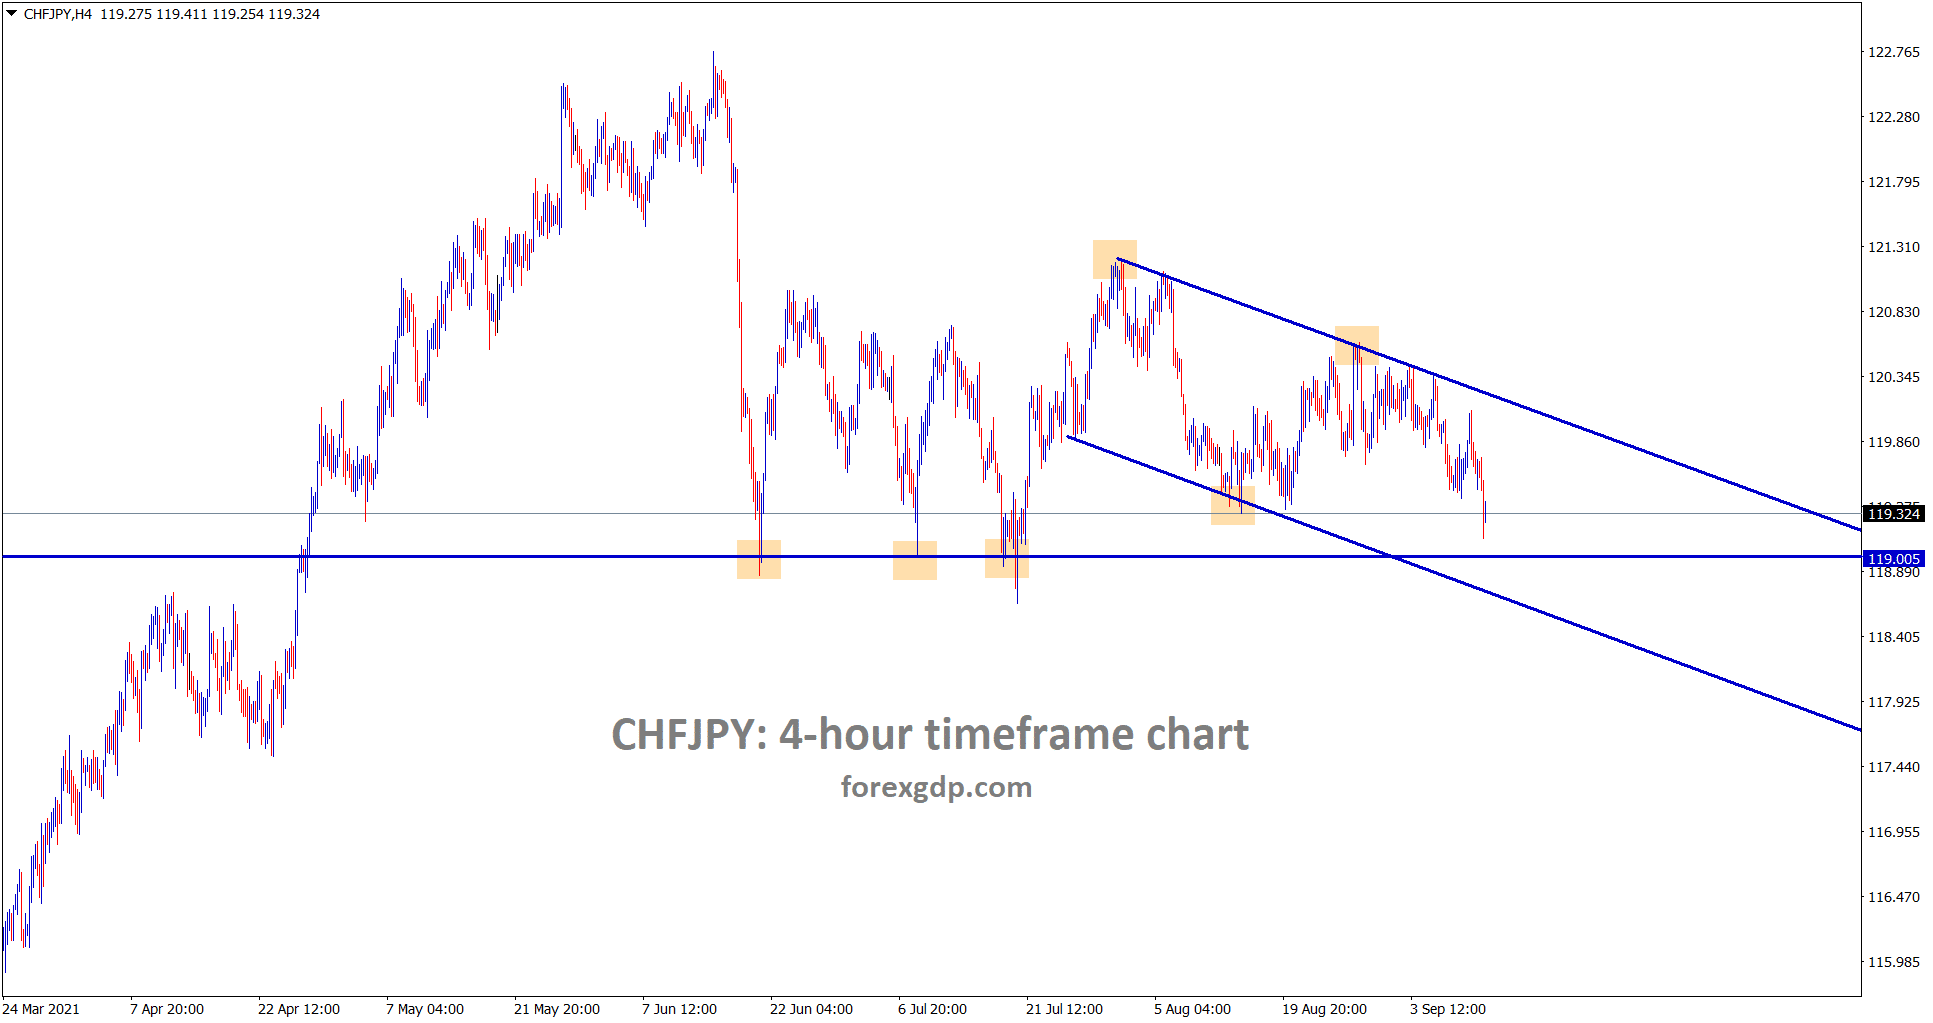 CHFJPY is moving towards the support area through the channel line